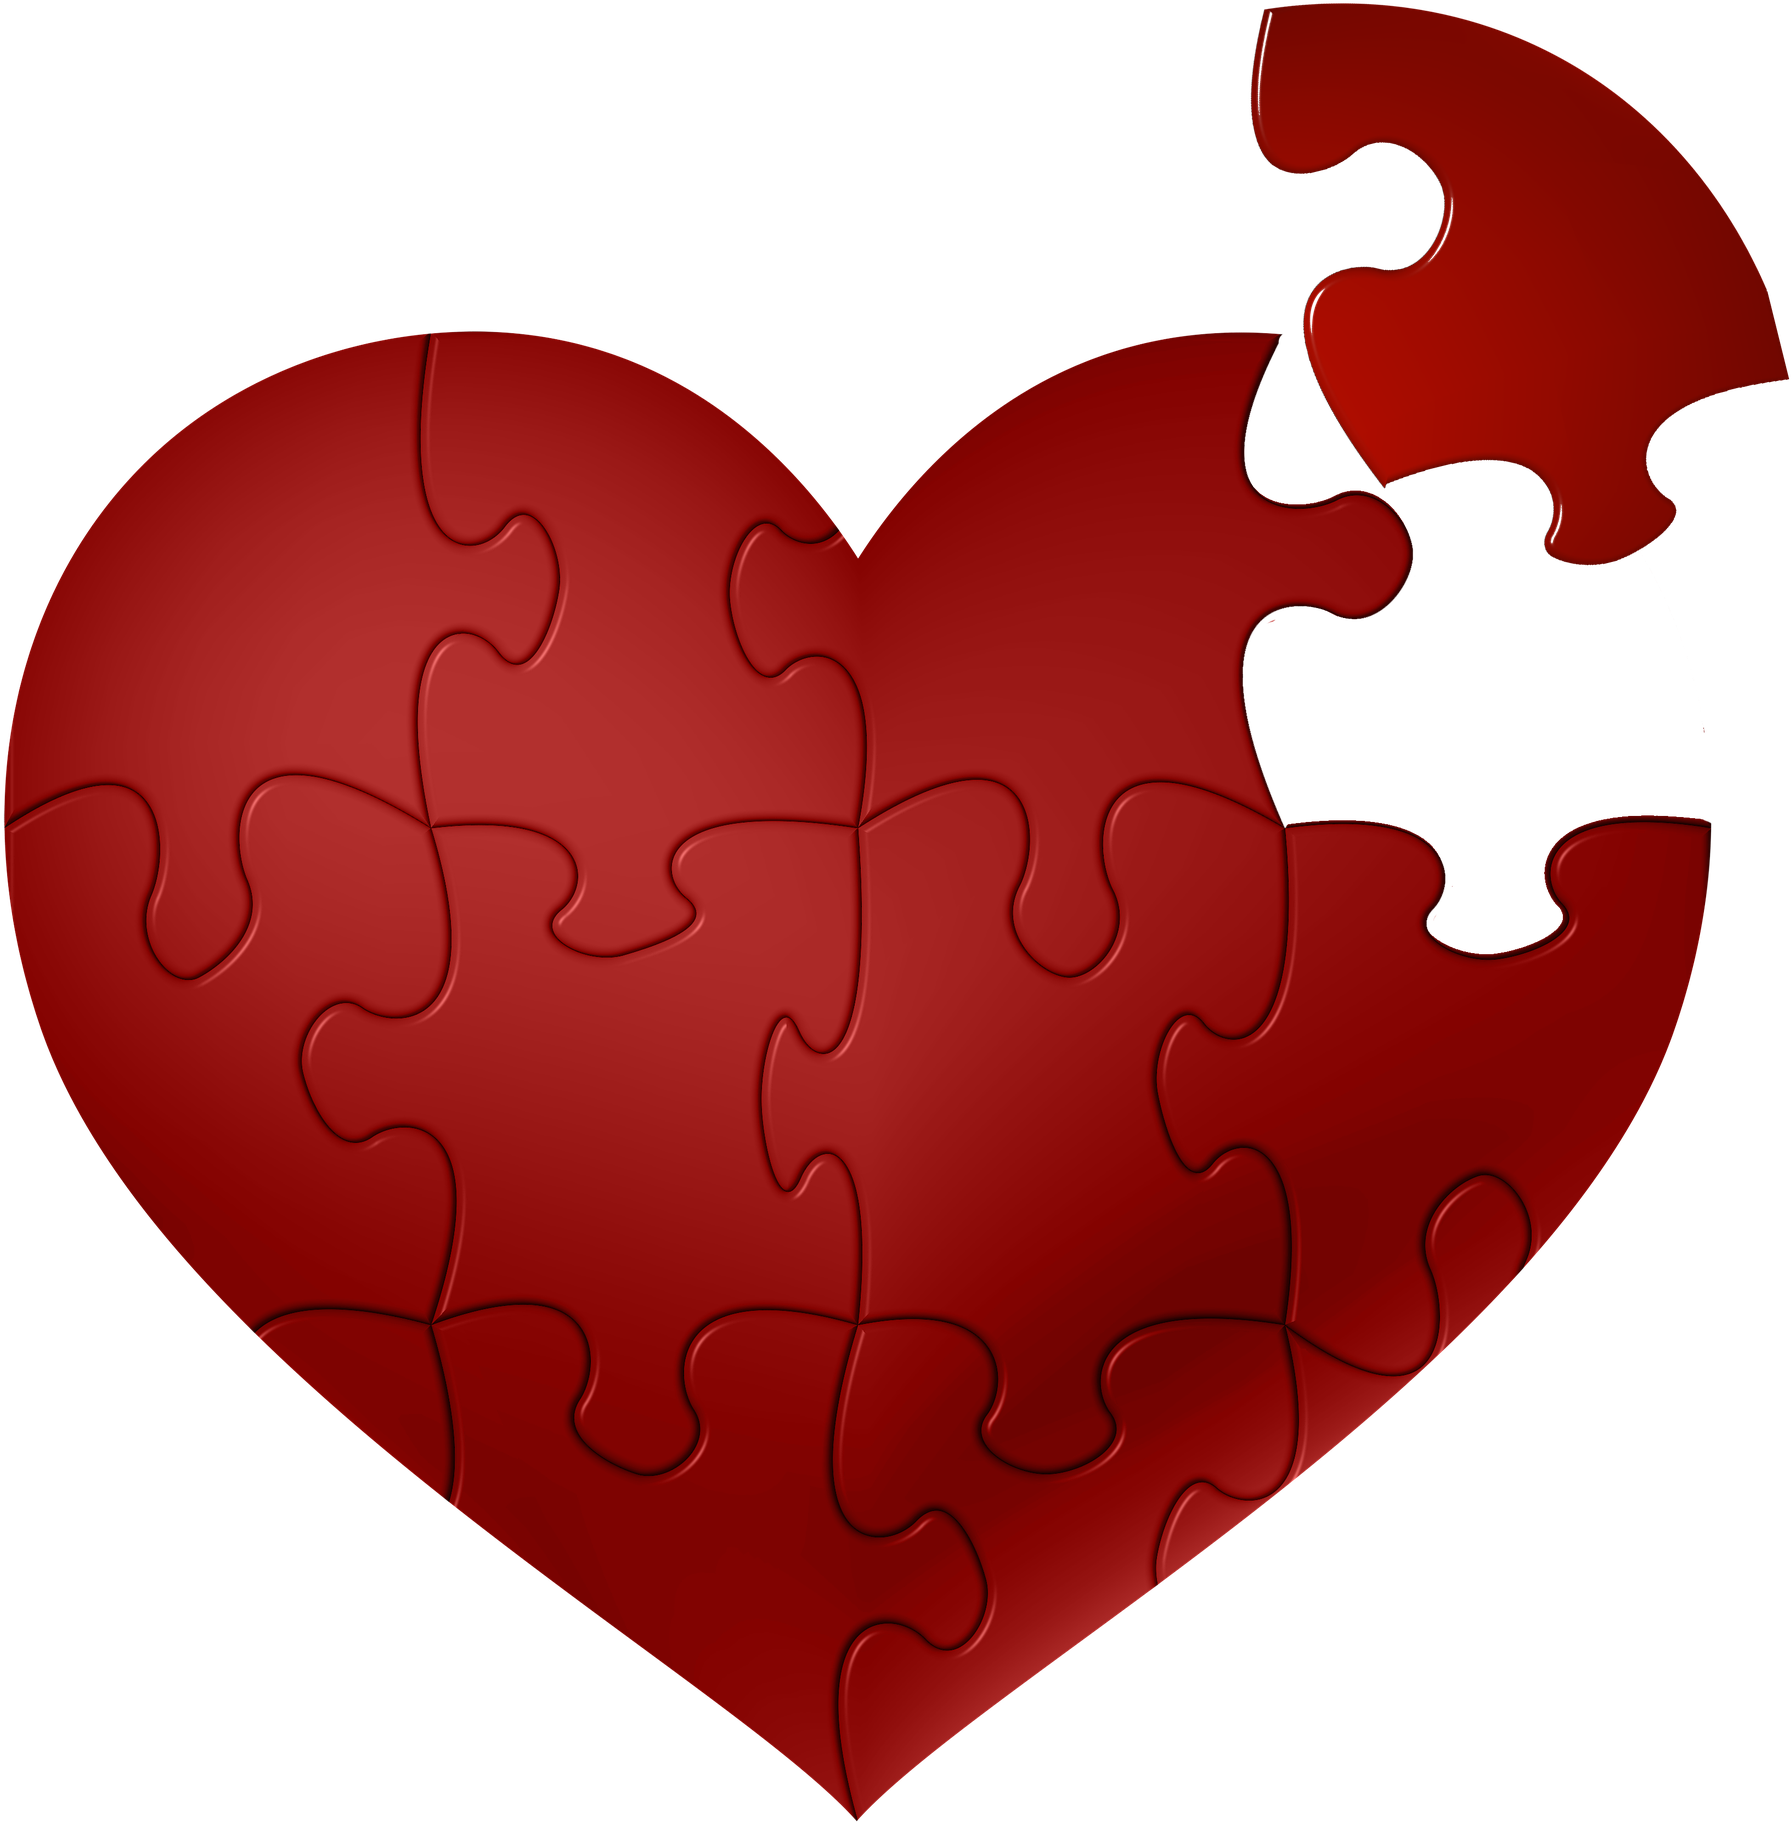 Heart Puzzle Piece Gifs (1920x1920)